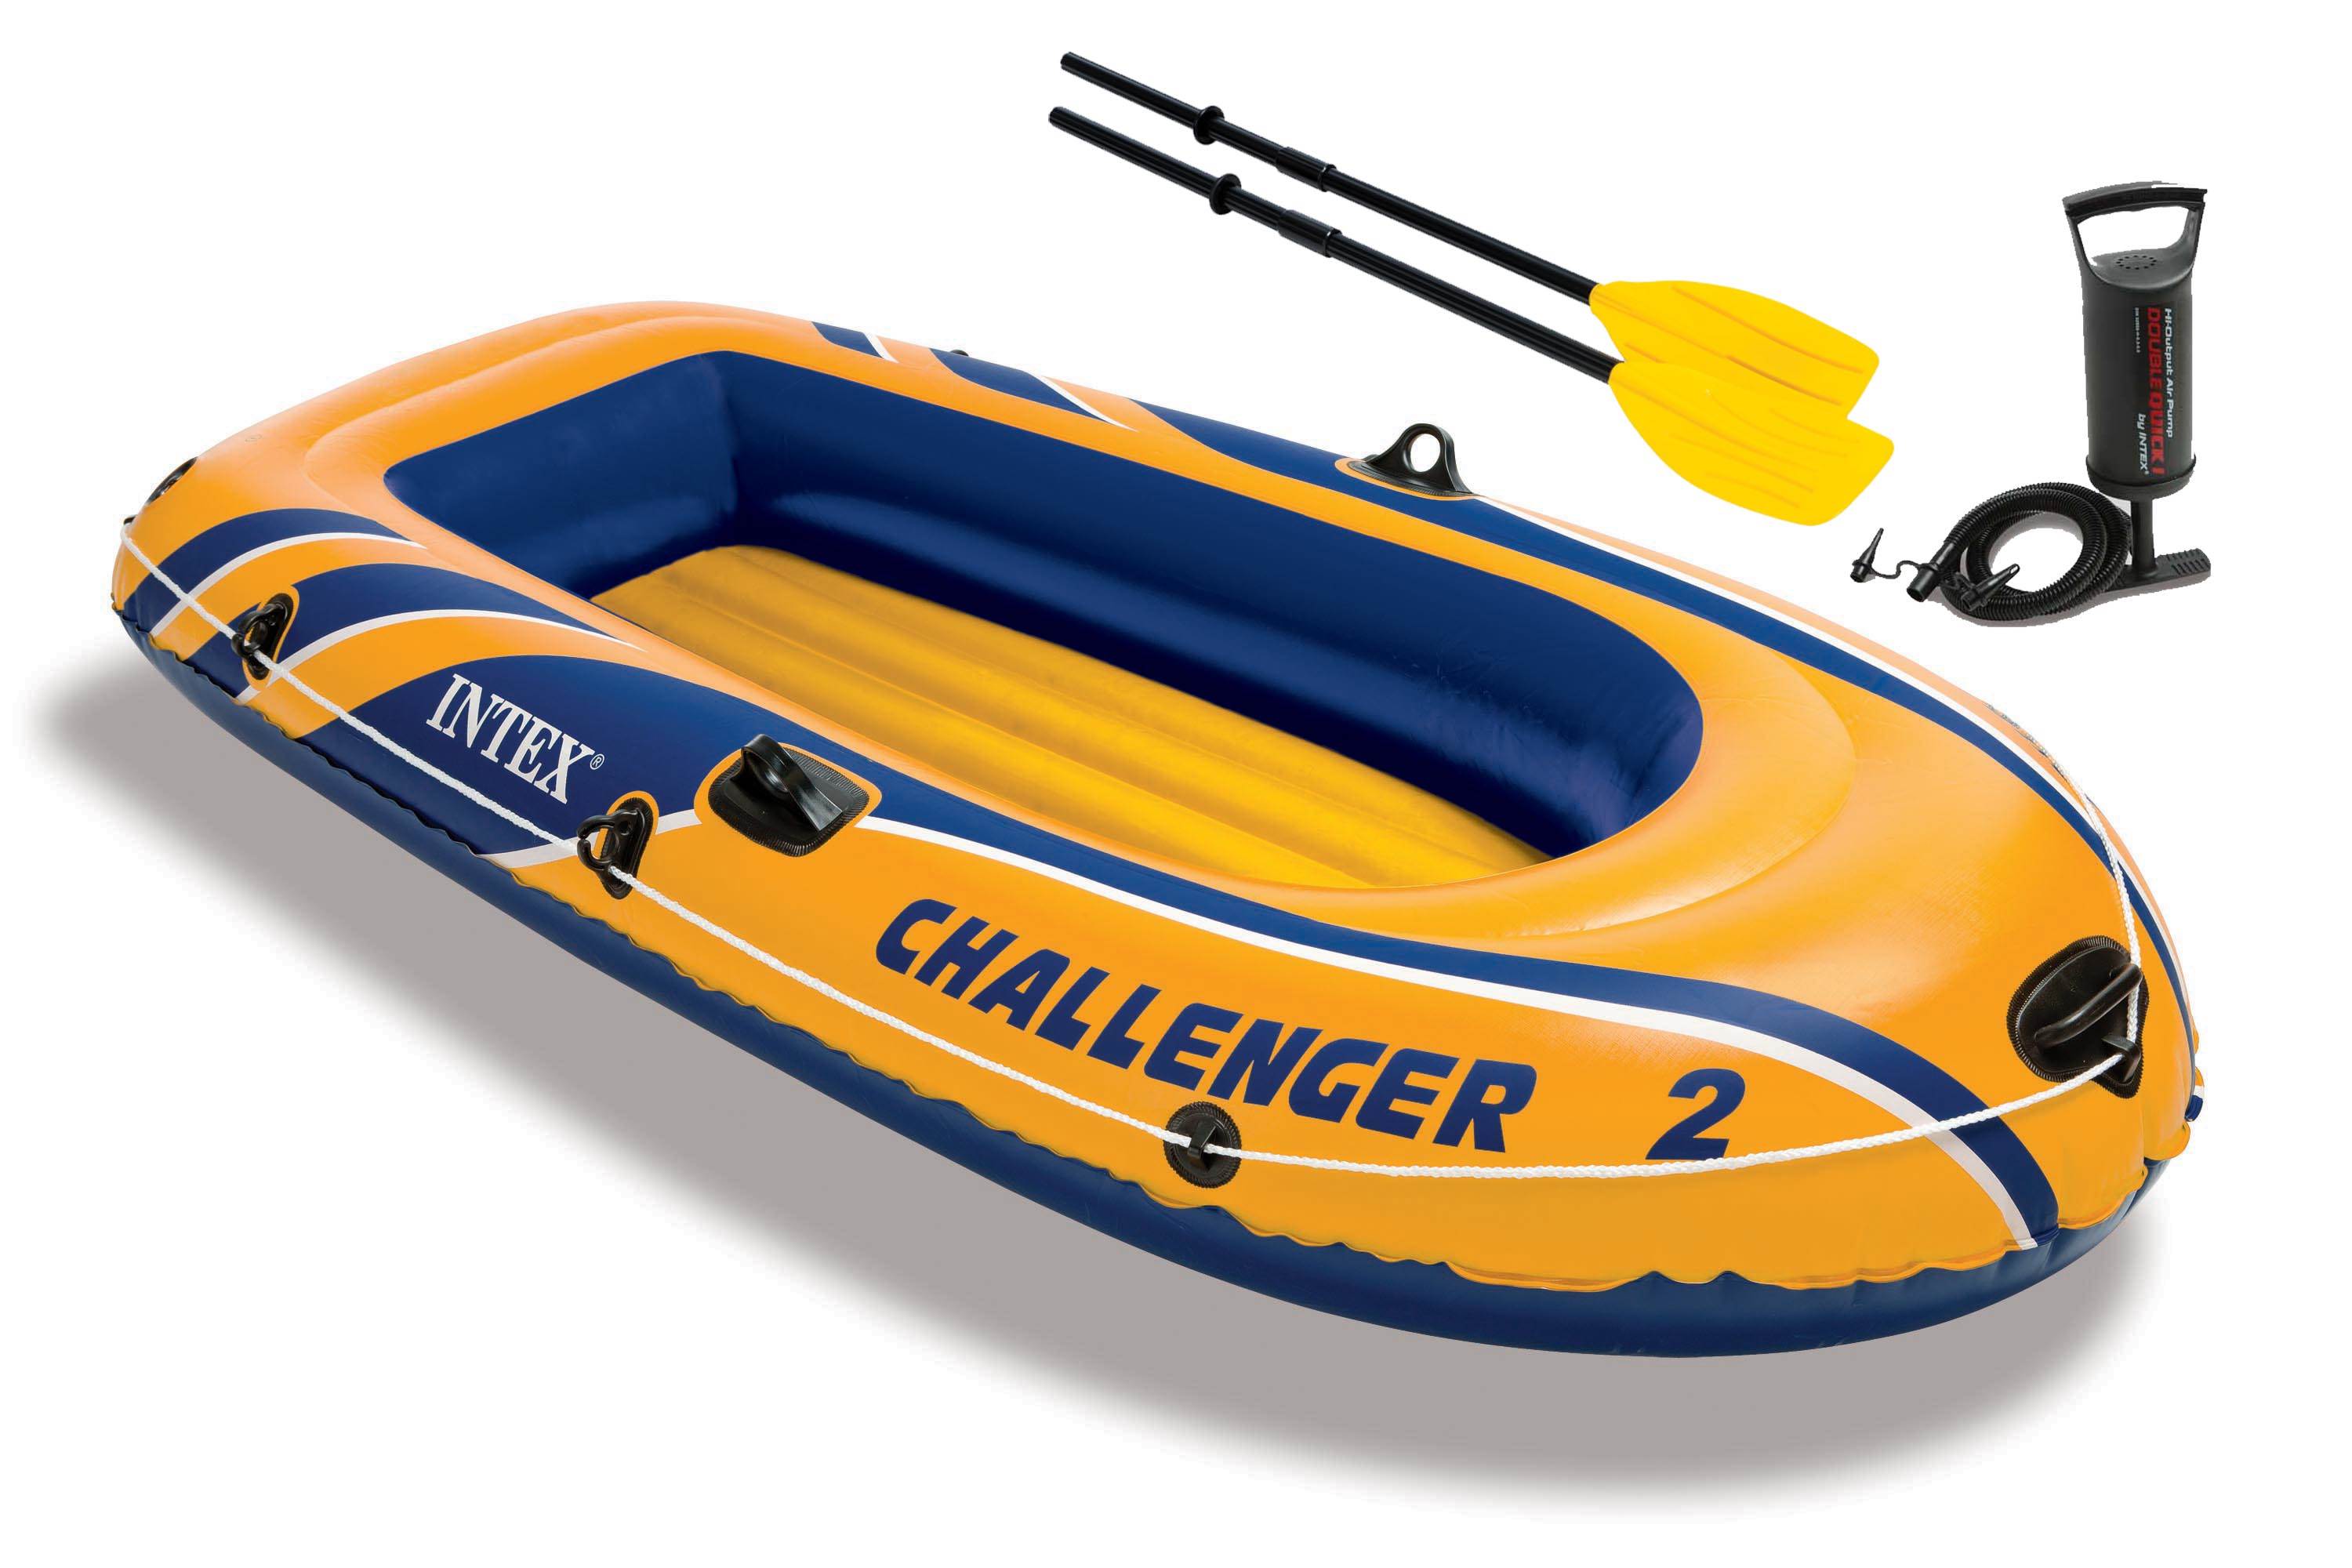 Intex Challenger 2, 2 Person Inflatable Raft with Oars & Air Pump - image 1 of 6